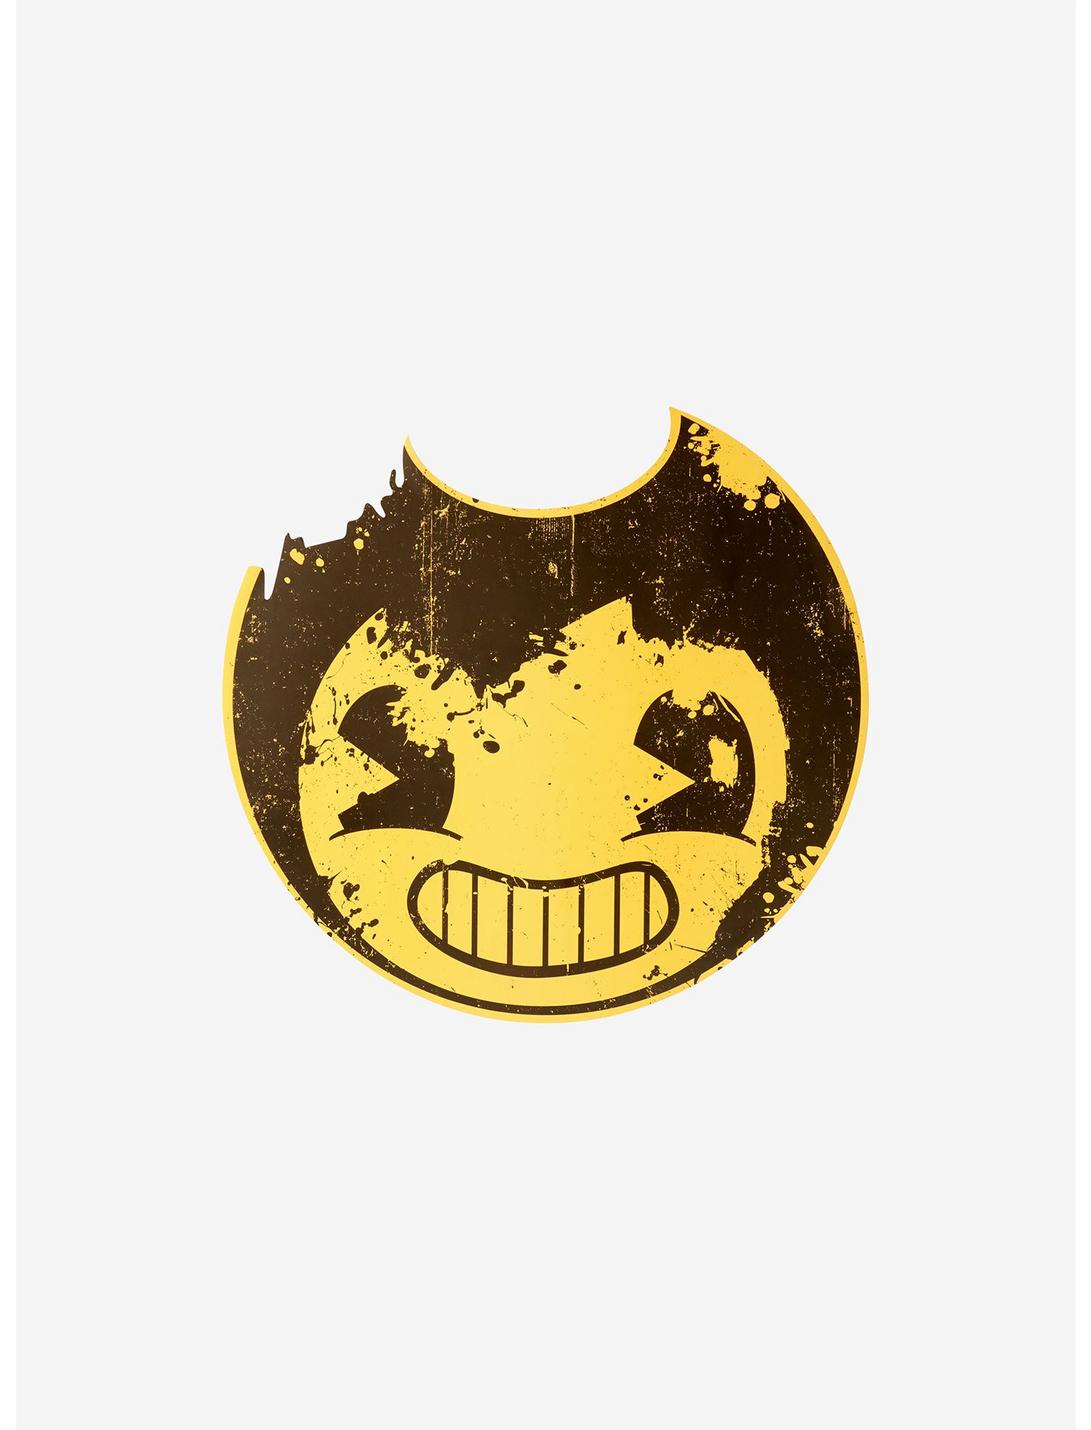 Bendy And The Ink Machine Wall Decal, , hi-res